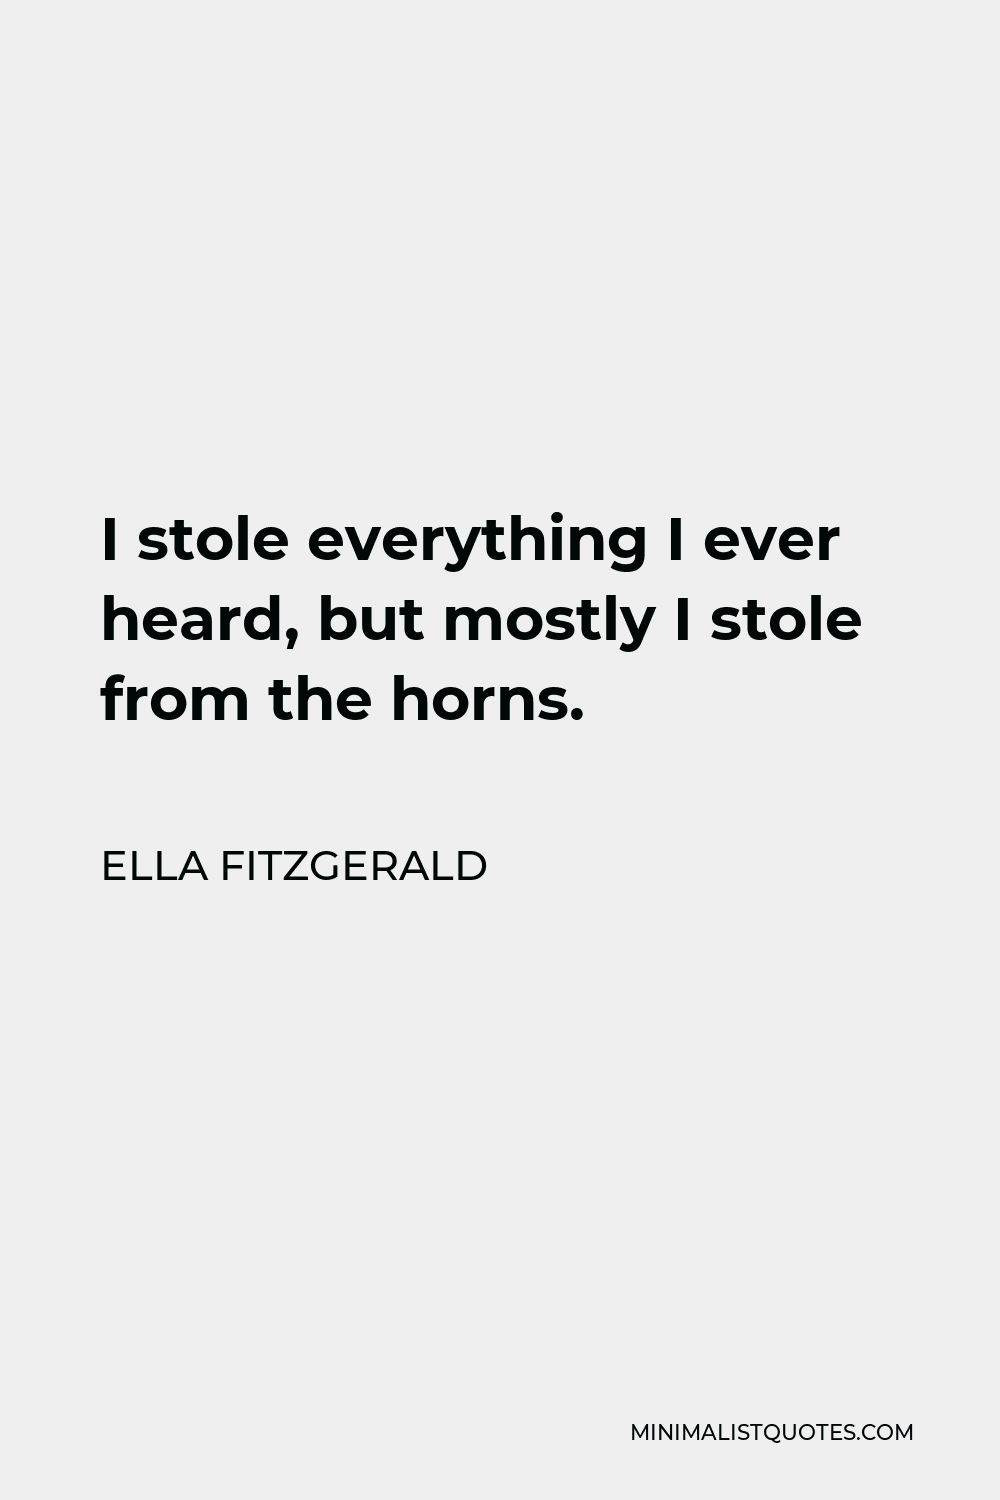 Ella Fitzgerald Quote - I stole everything I ever heard, but mostly I stole from the horns.